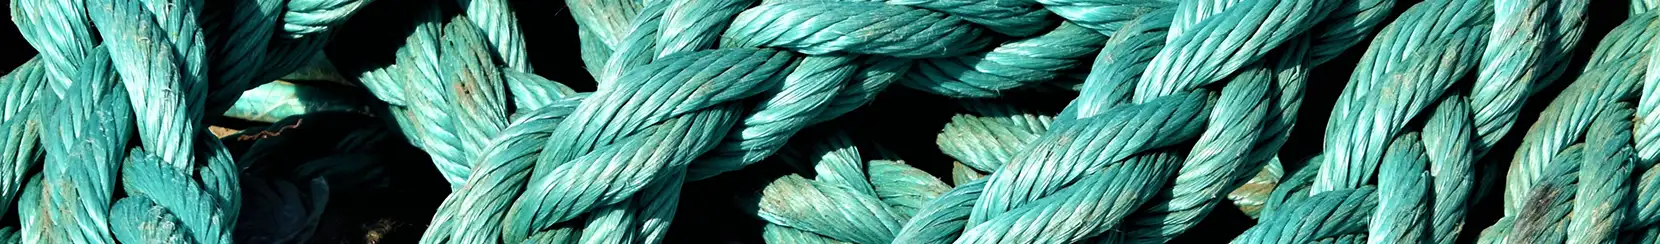 A macro photograph of teal fishing rope.